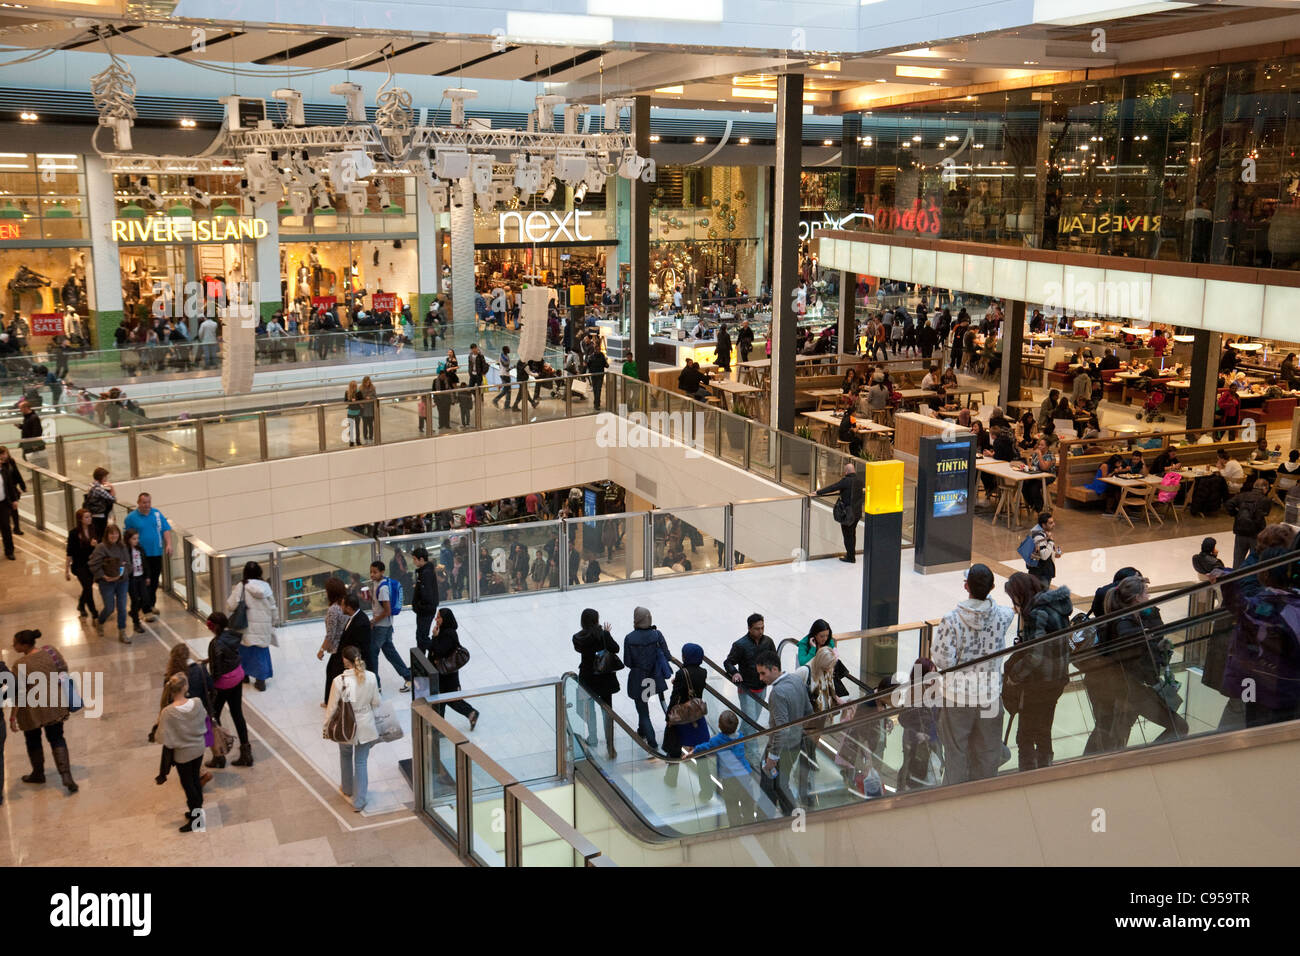 Westfield Stratford; Westfield shopping Mall Center, Stratford, Londres, Royaume-Uni Banque D'Images